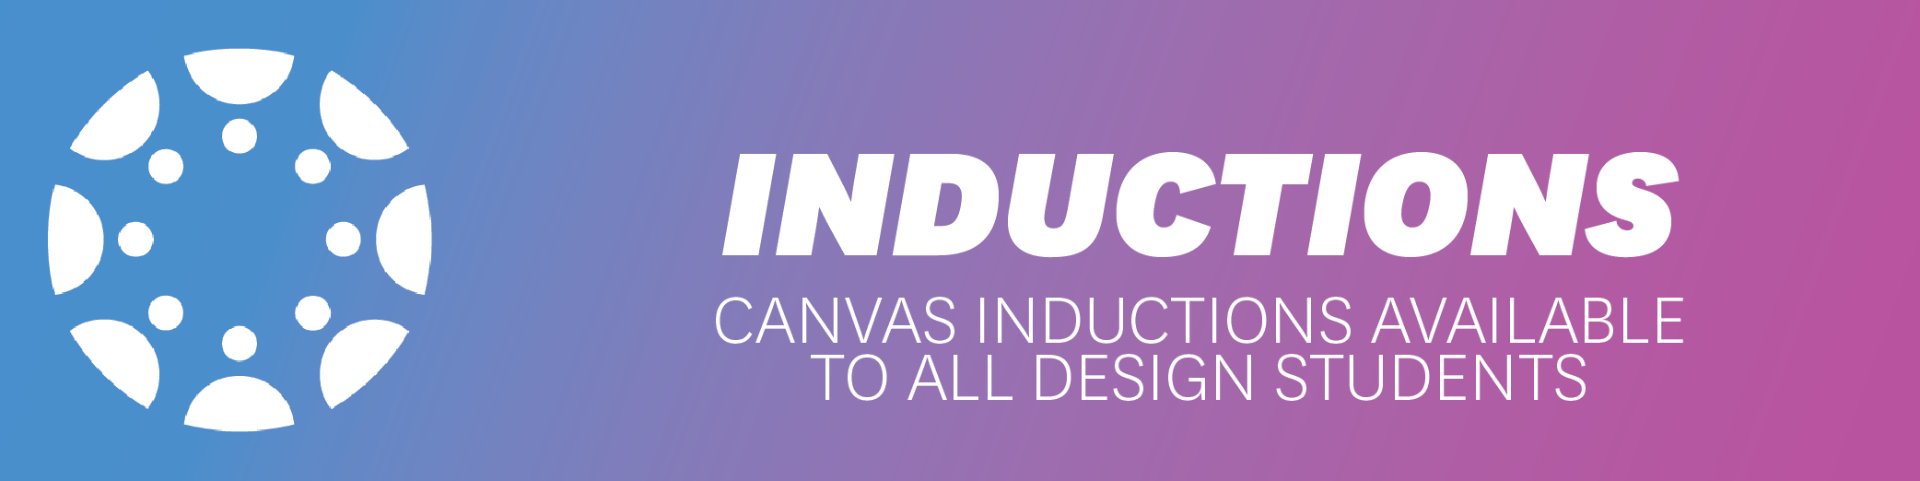 Link to Canvas Inducations